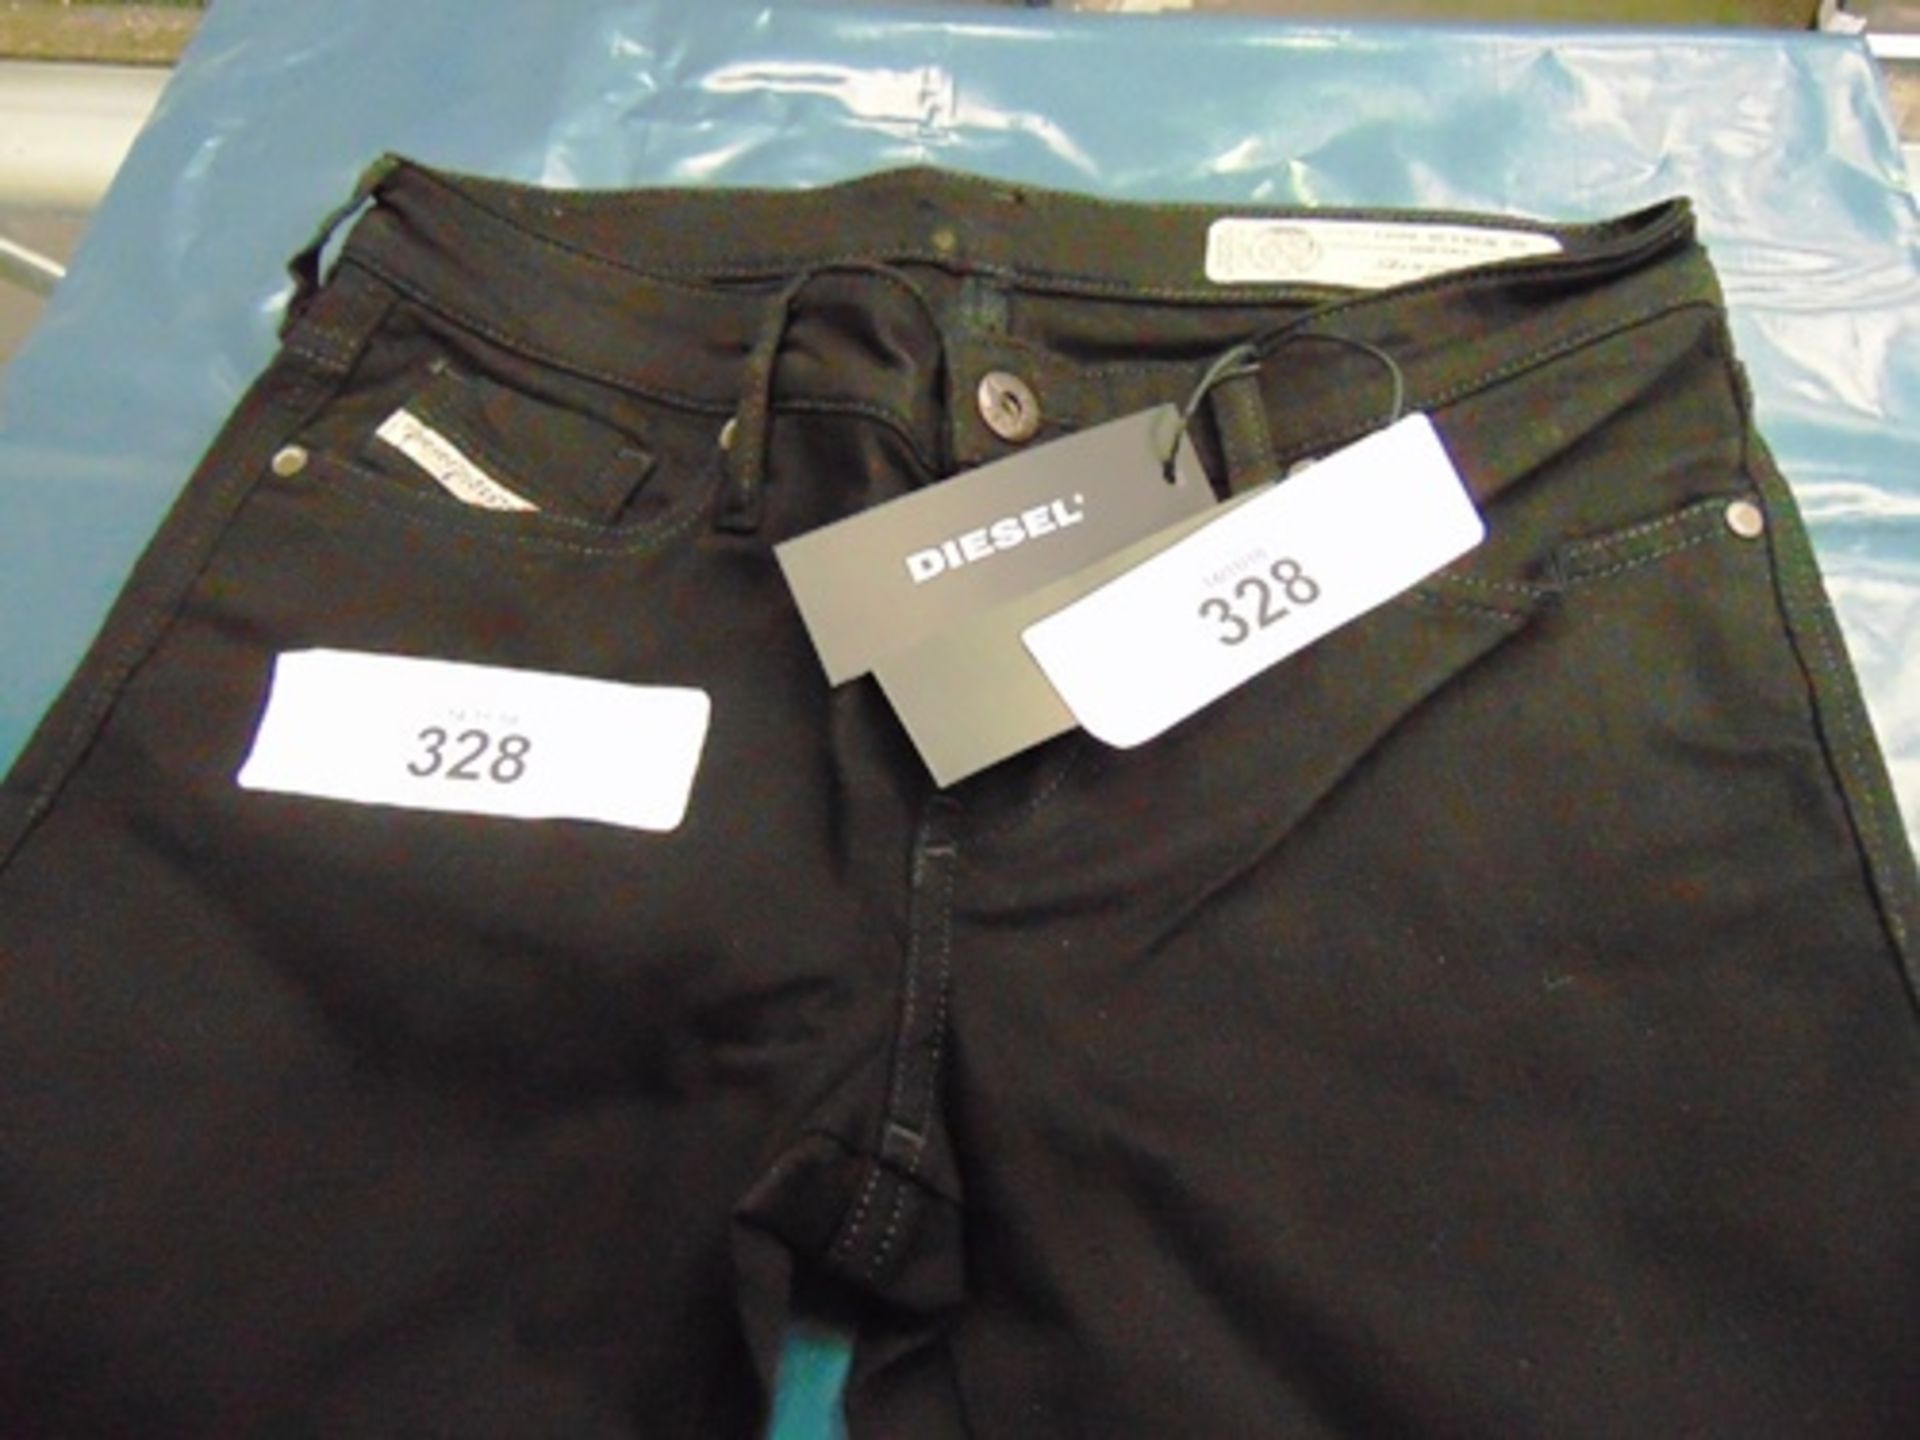 1 x pair of Diesel skinzee-low L30 trousers, size 28, length 30, RRP £80.00 - New with tags (CC1)